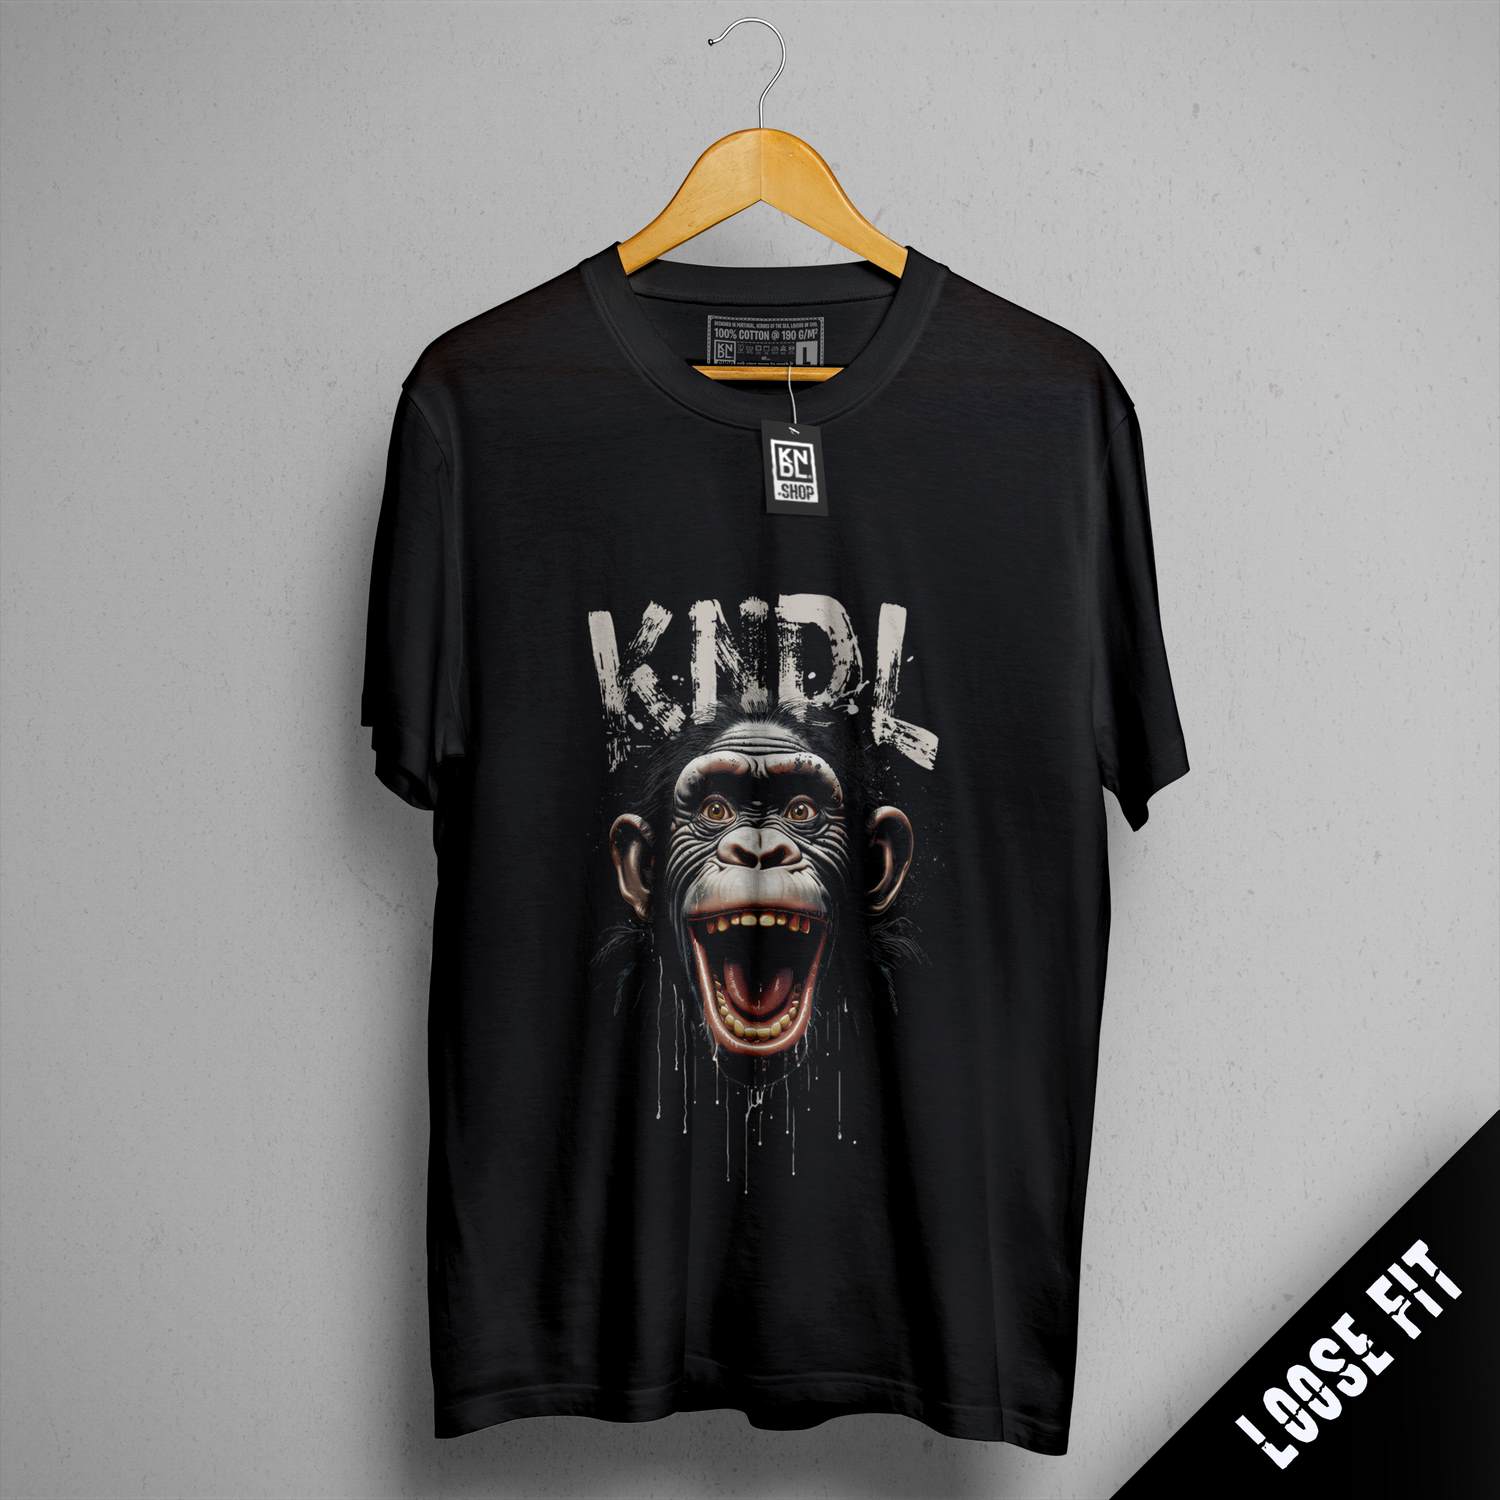 a black t - shirt with an image of a monkey on it